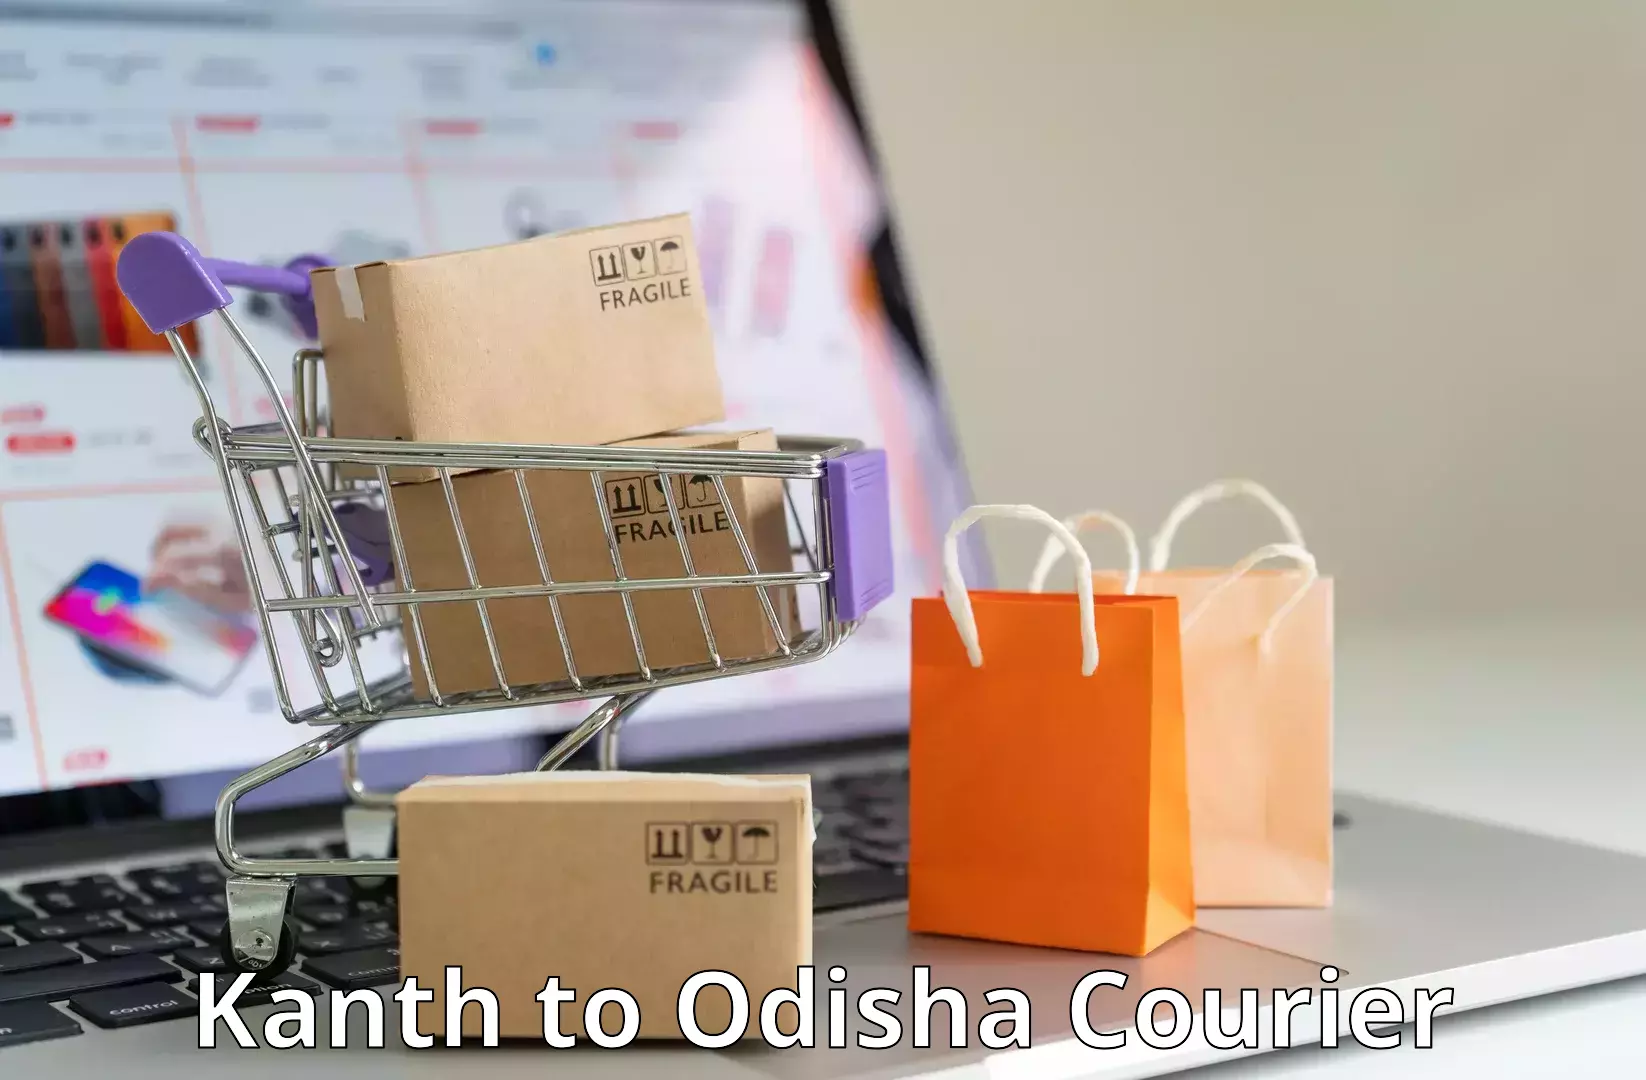 State-of-the-art courier technology Kanth to Dhenkanal